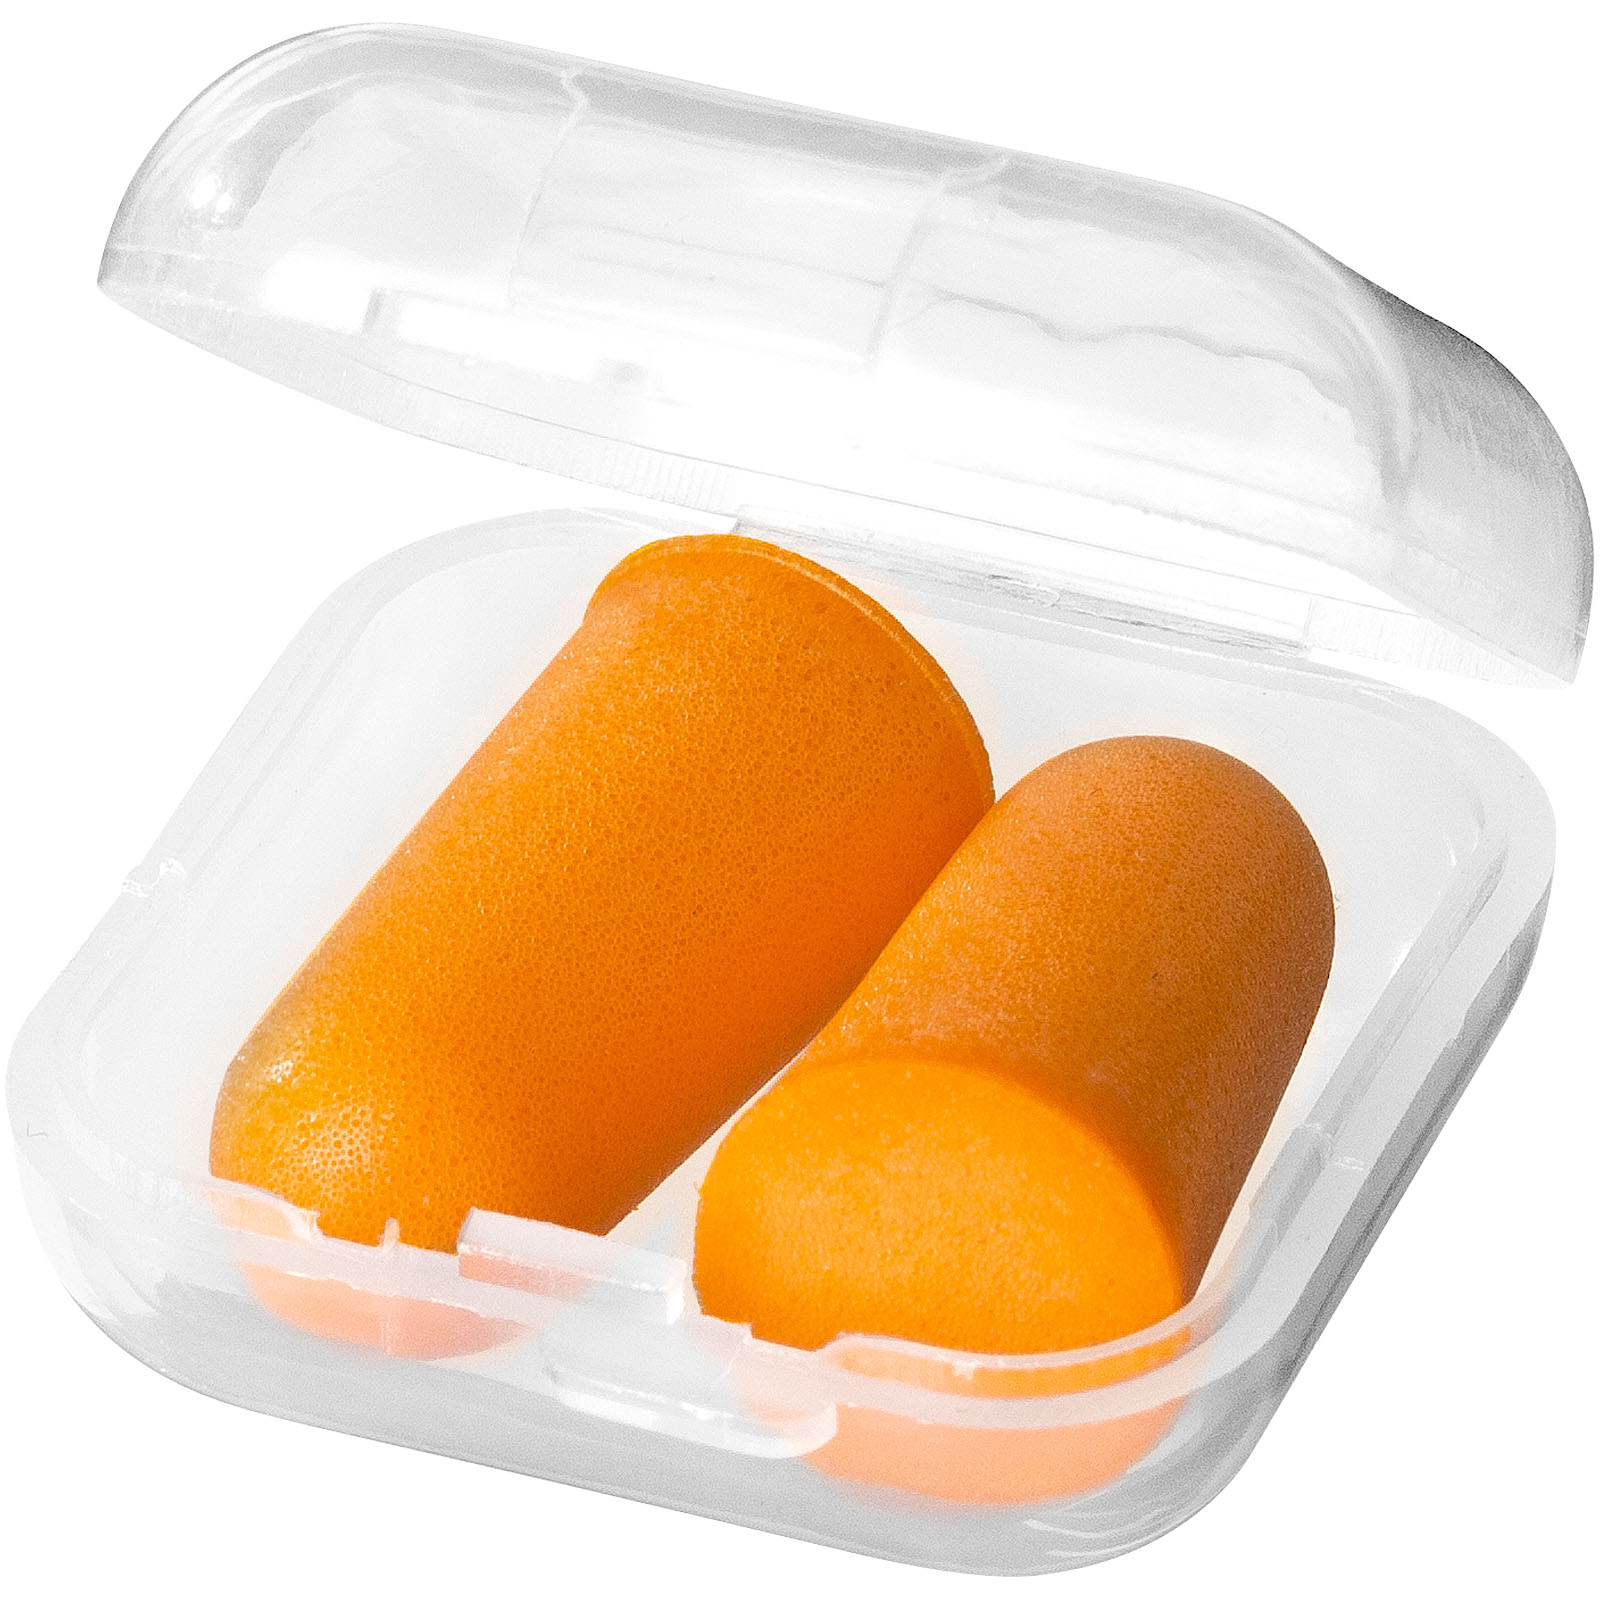 Sports & Leisure - Serenity earplugs with travel case